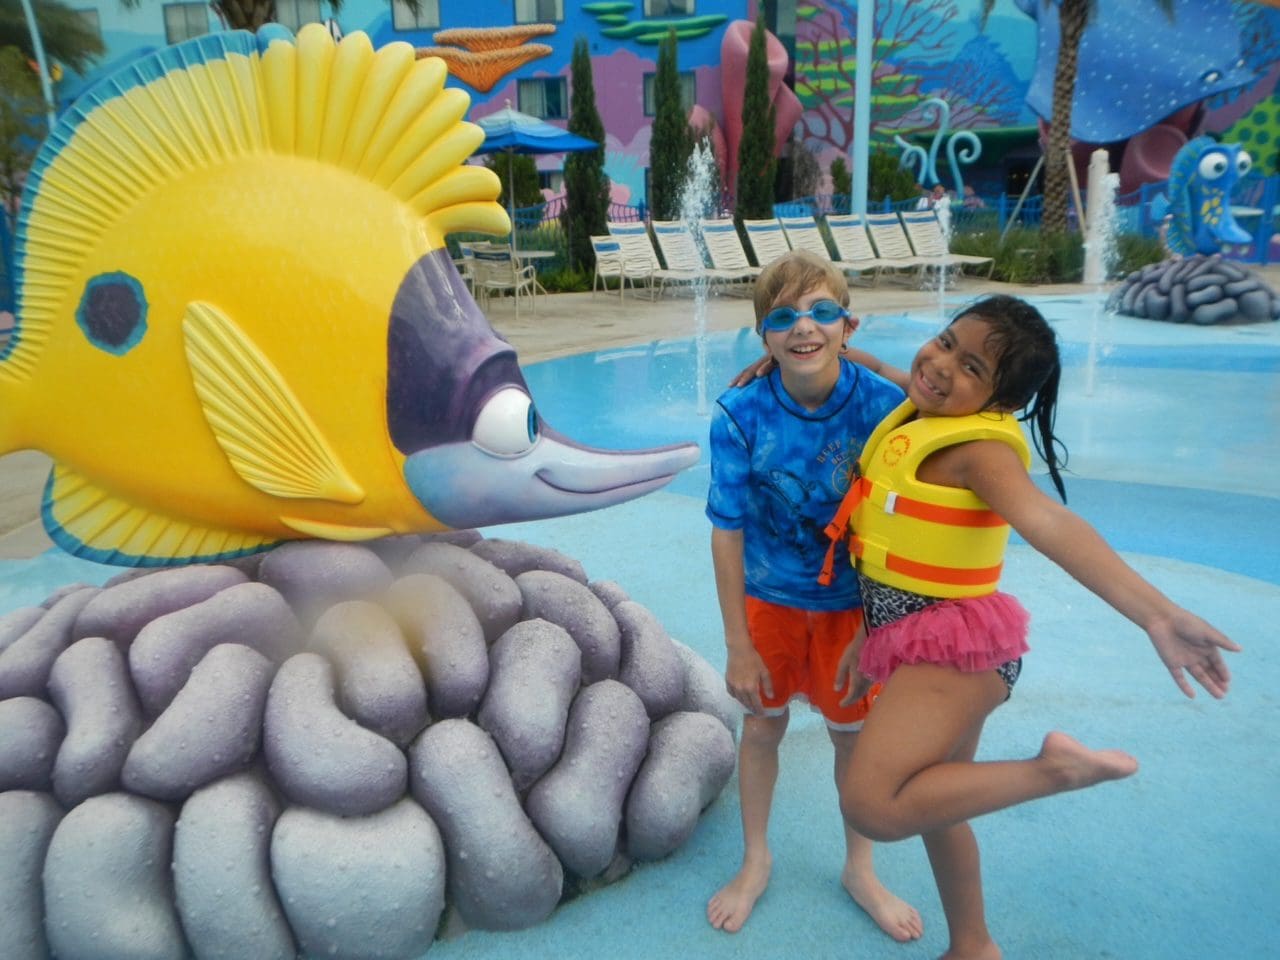 A brother and sister stand together by a large animated fish at Disney's Art of Animation Resort.